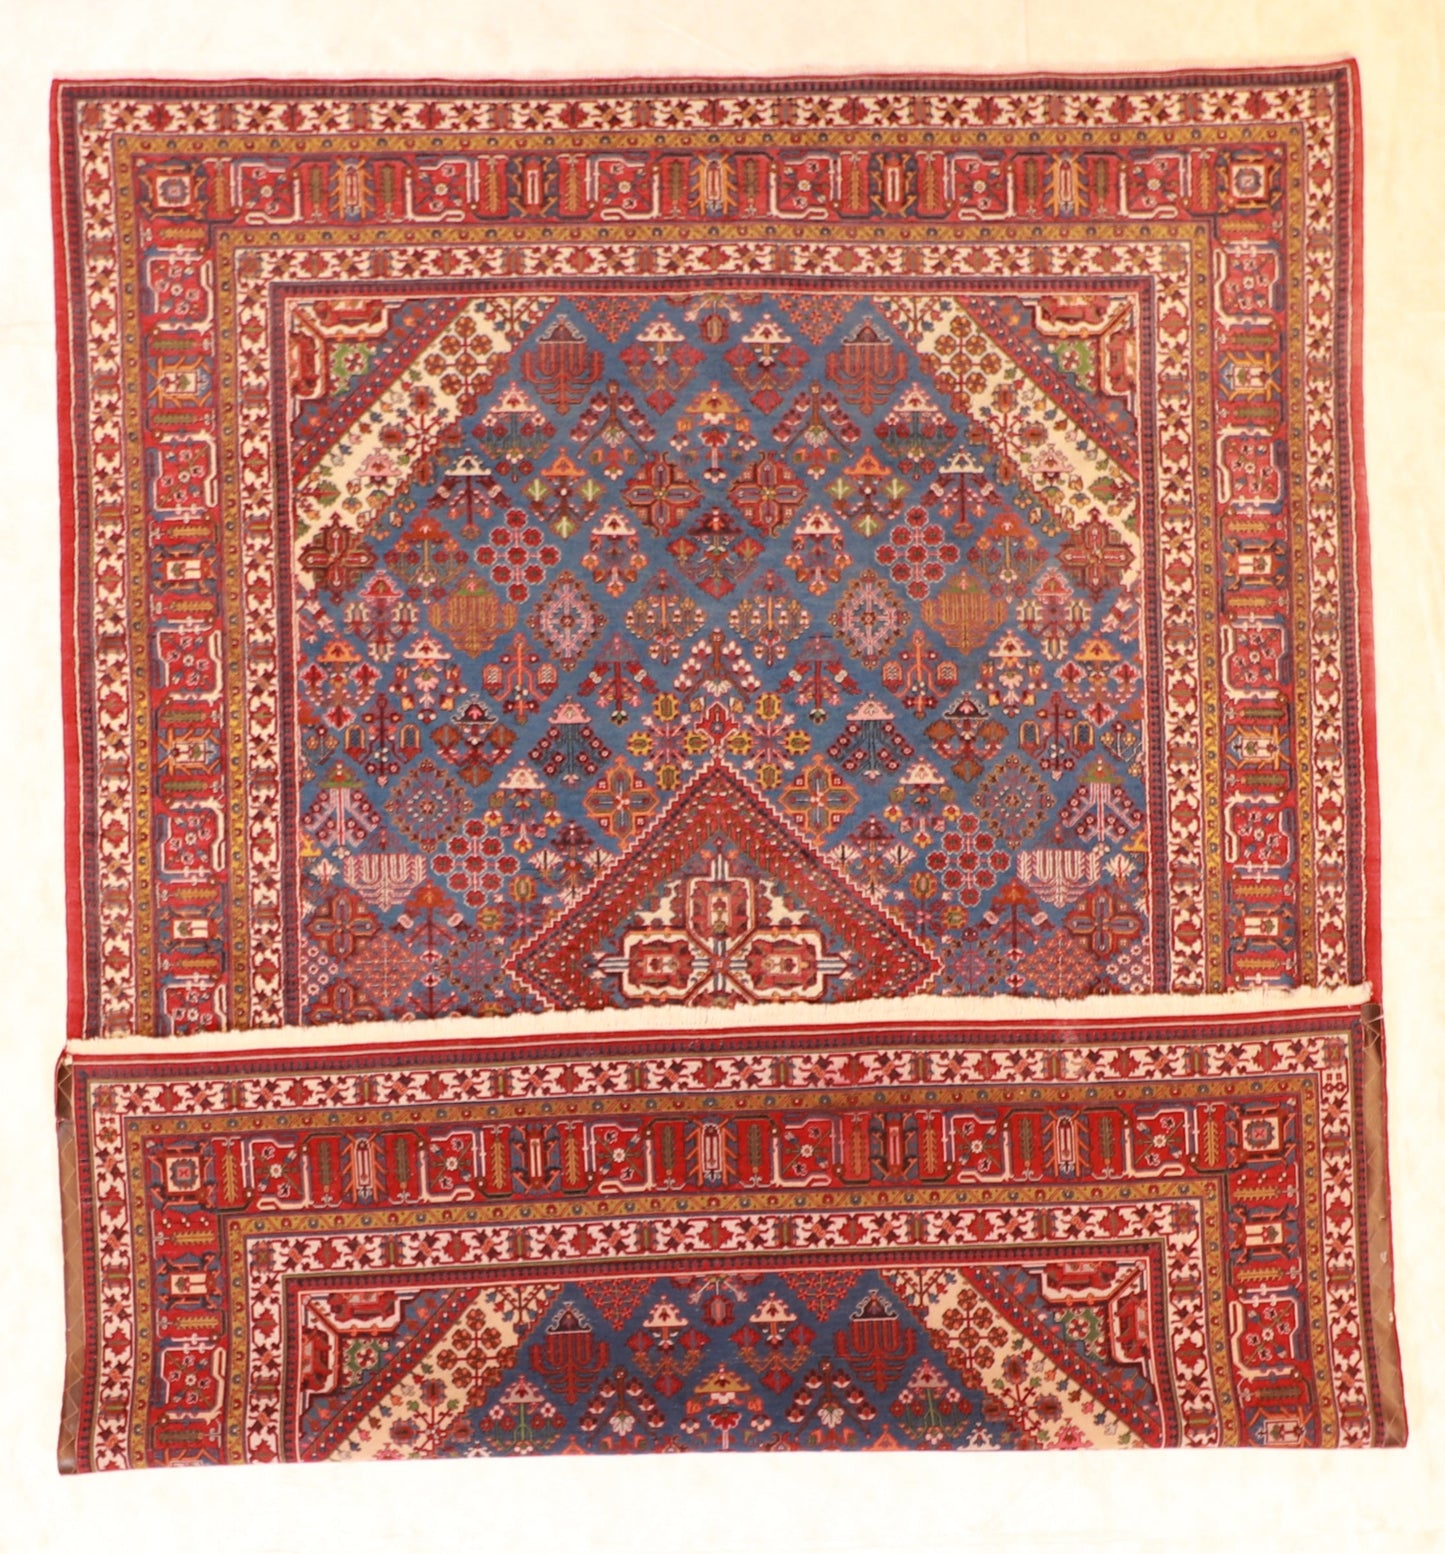 9x12 - Jozan Fine/Wool All Over Rectangle - Hand Knotted Rug